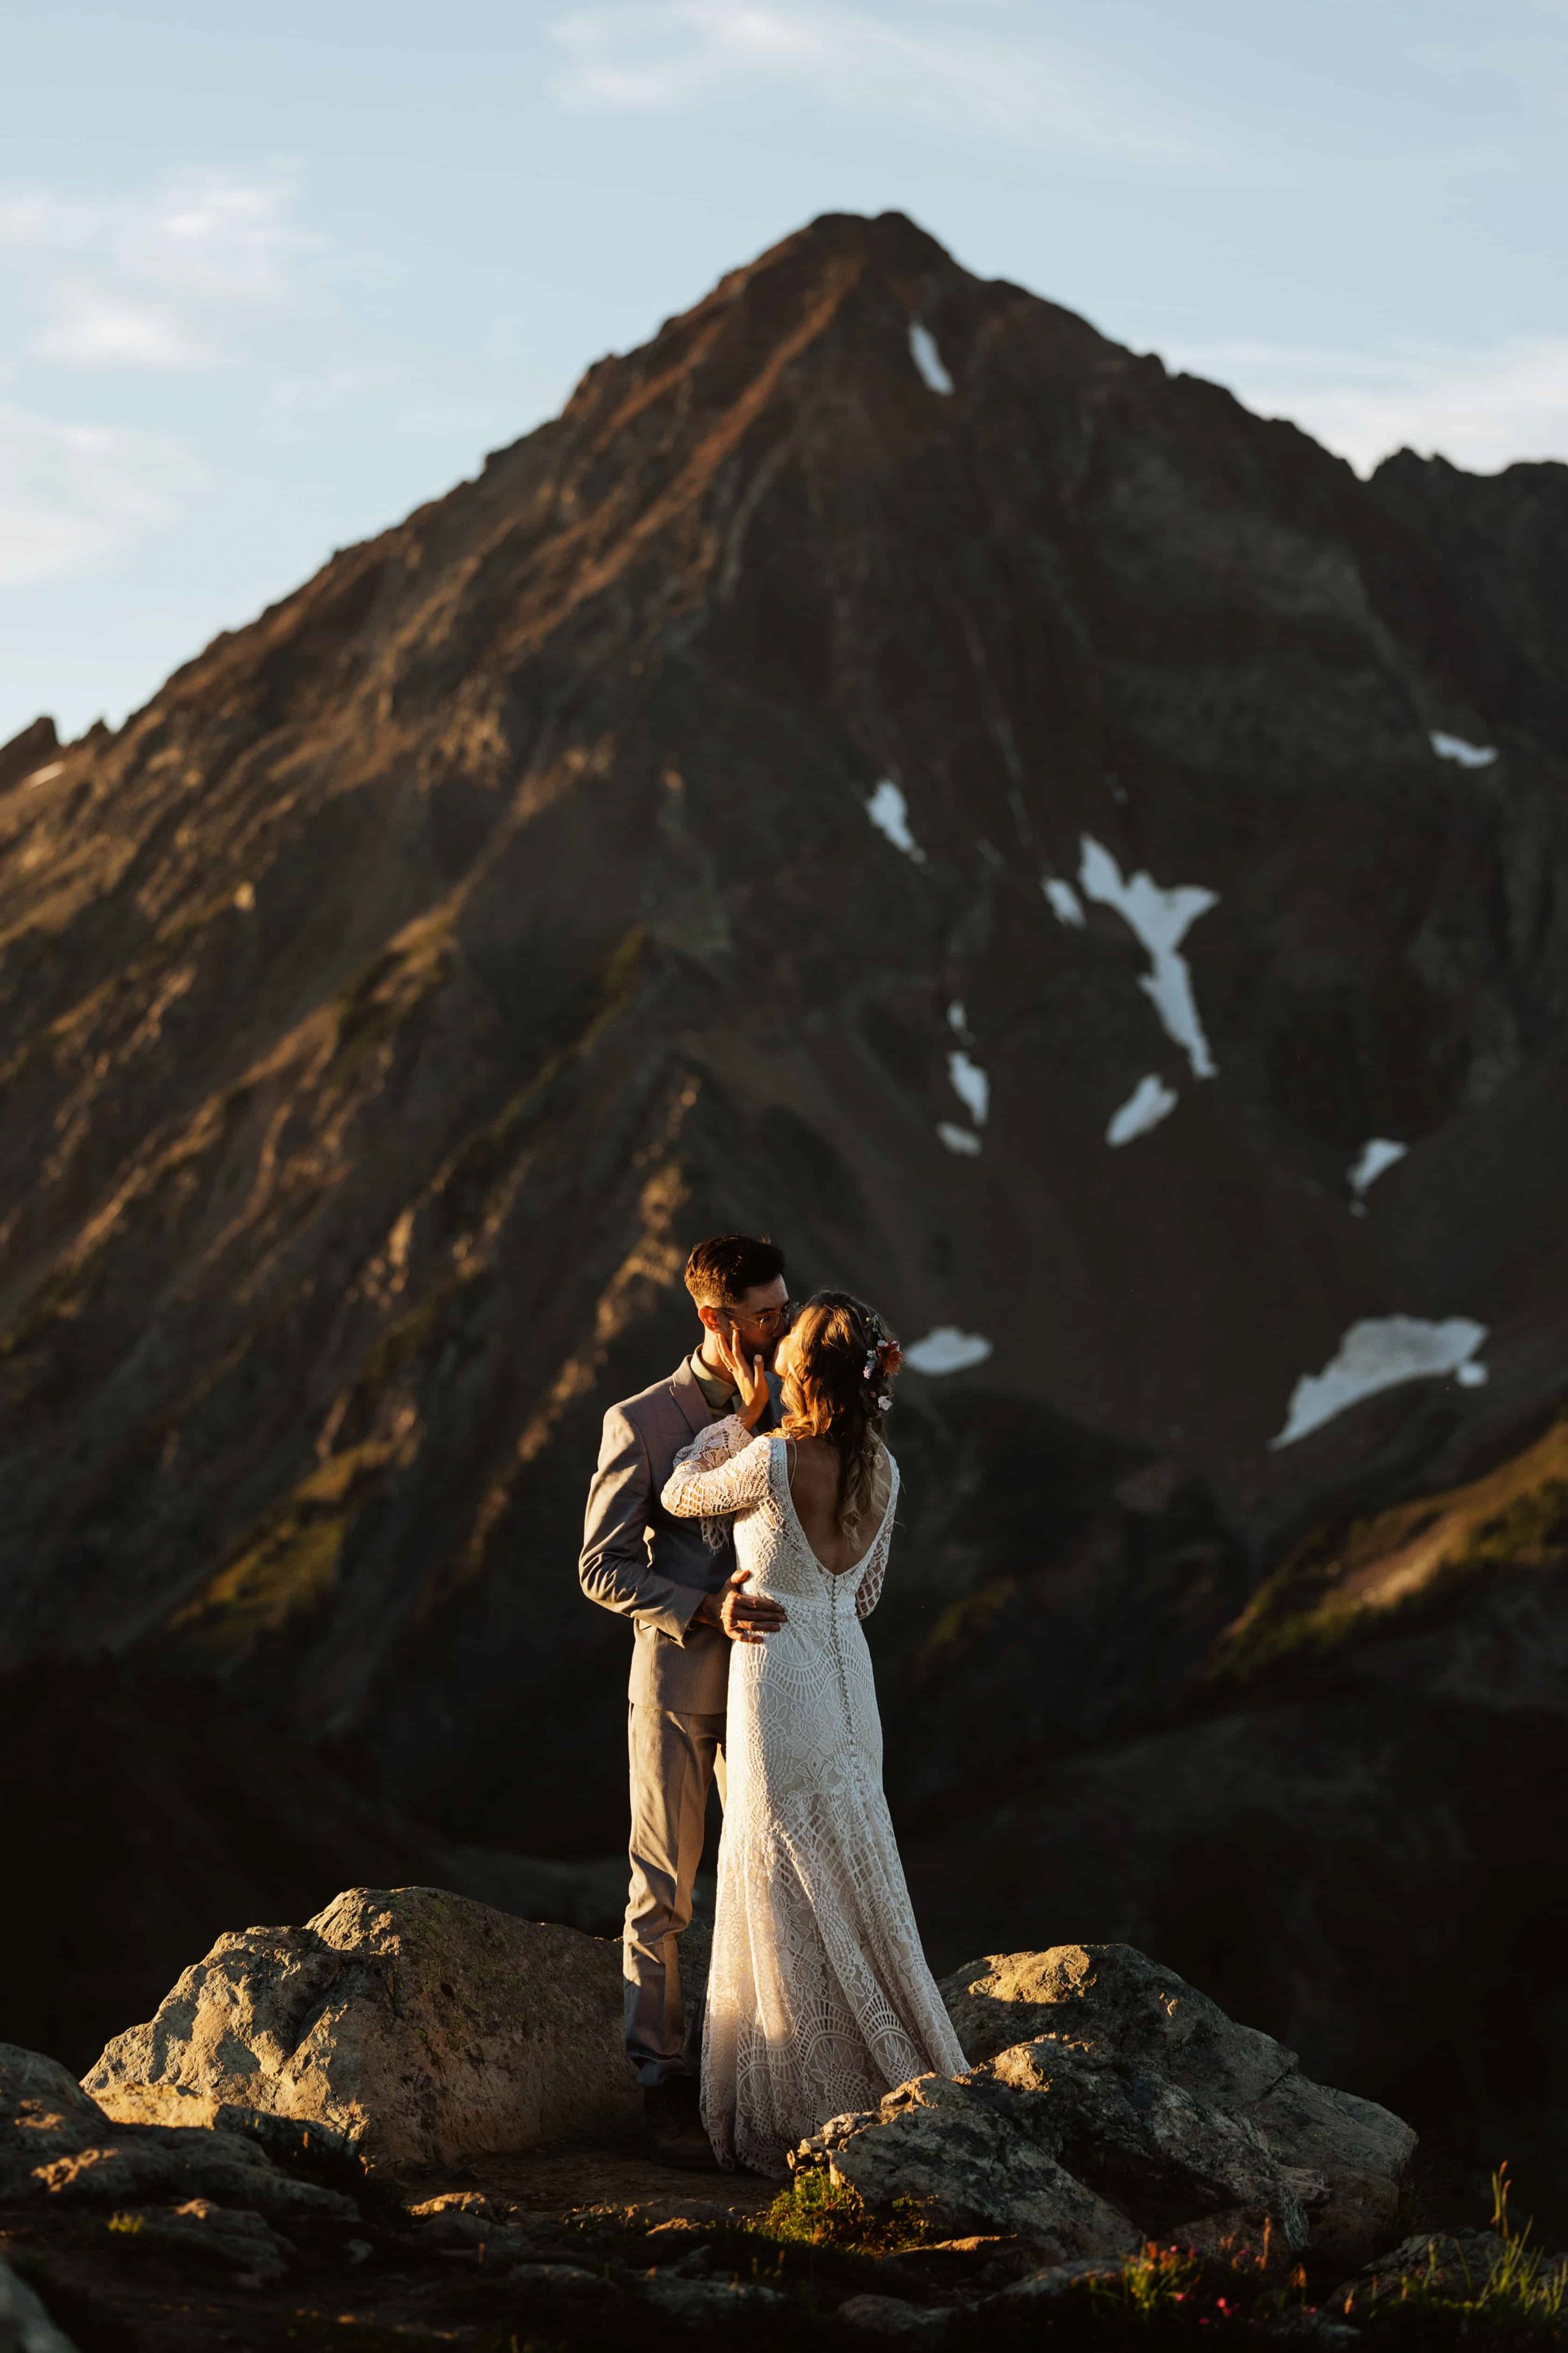 The Ultimate Mountain Elopement Guide- How to get Married in the Mountains